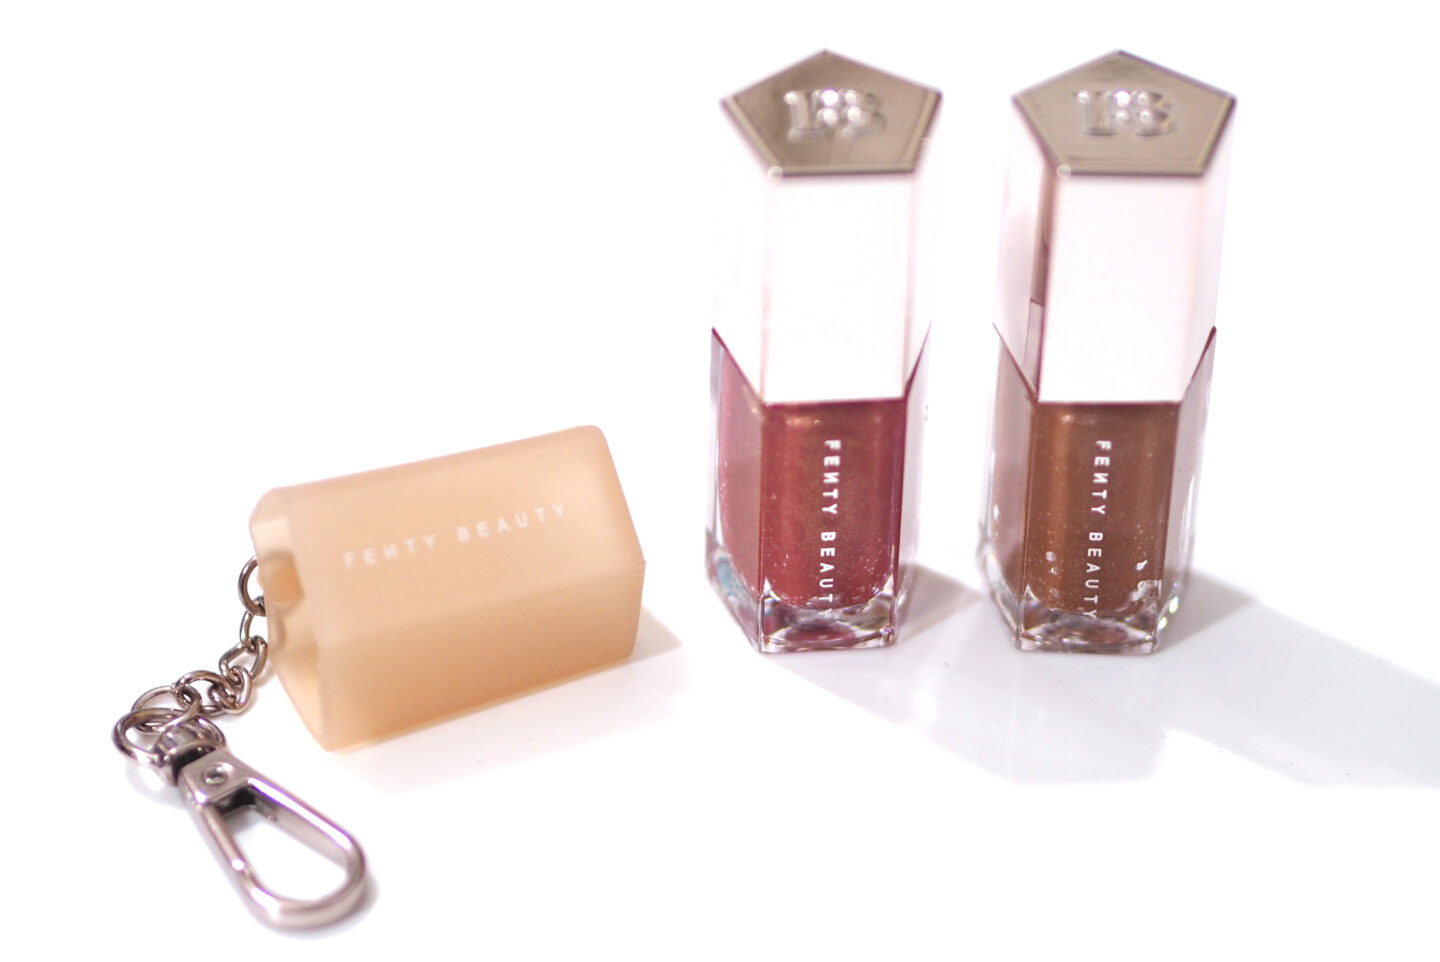 Fenty Beauty Mini Lip Duo Keychain Holder Review And Swatches Chic Moey